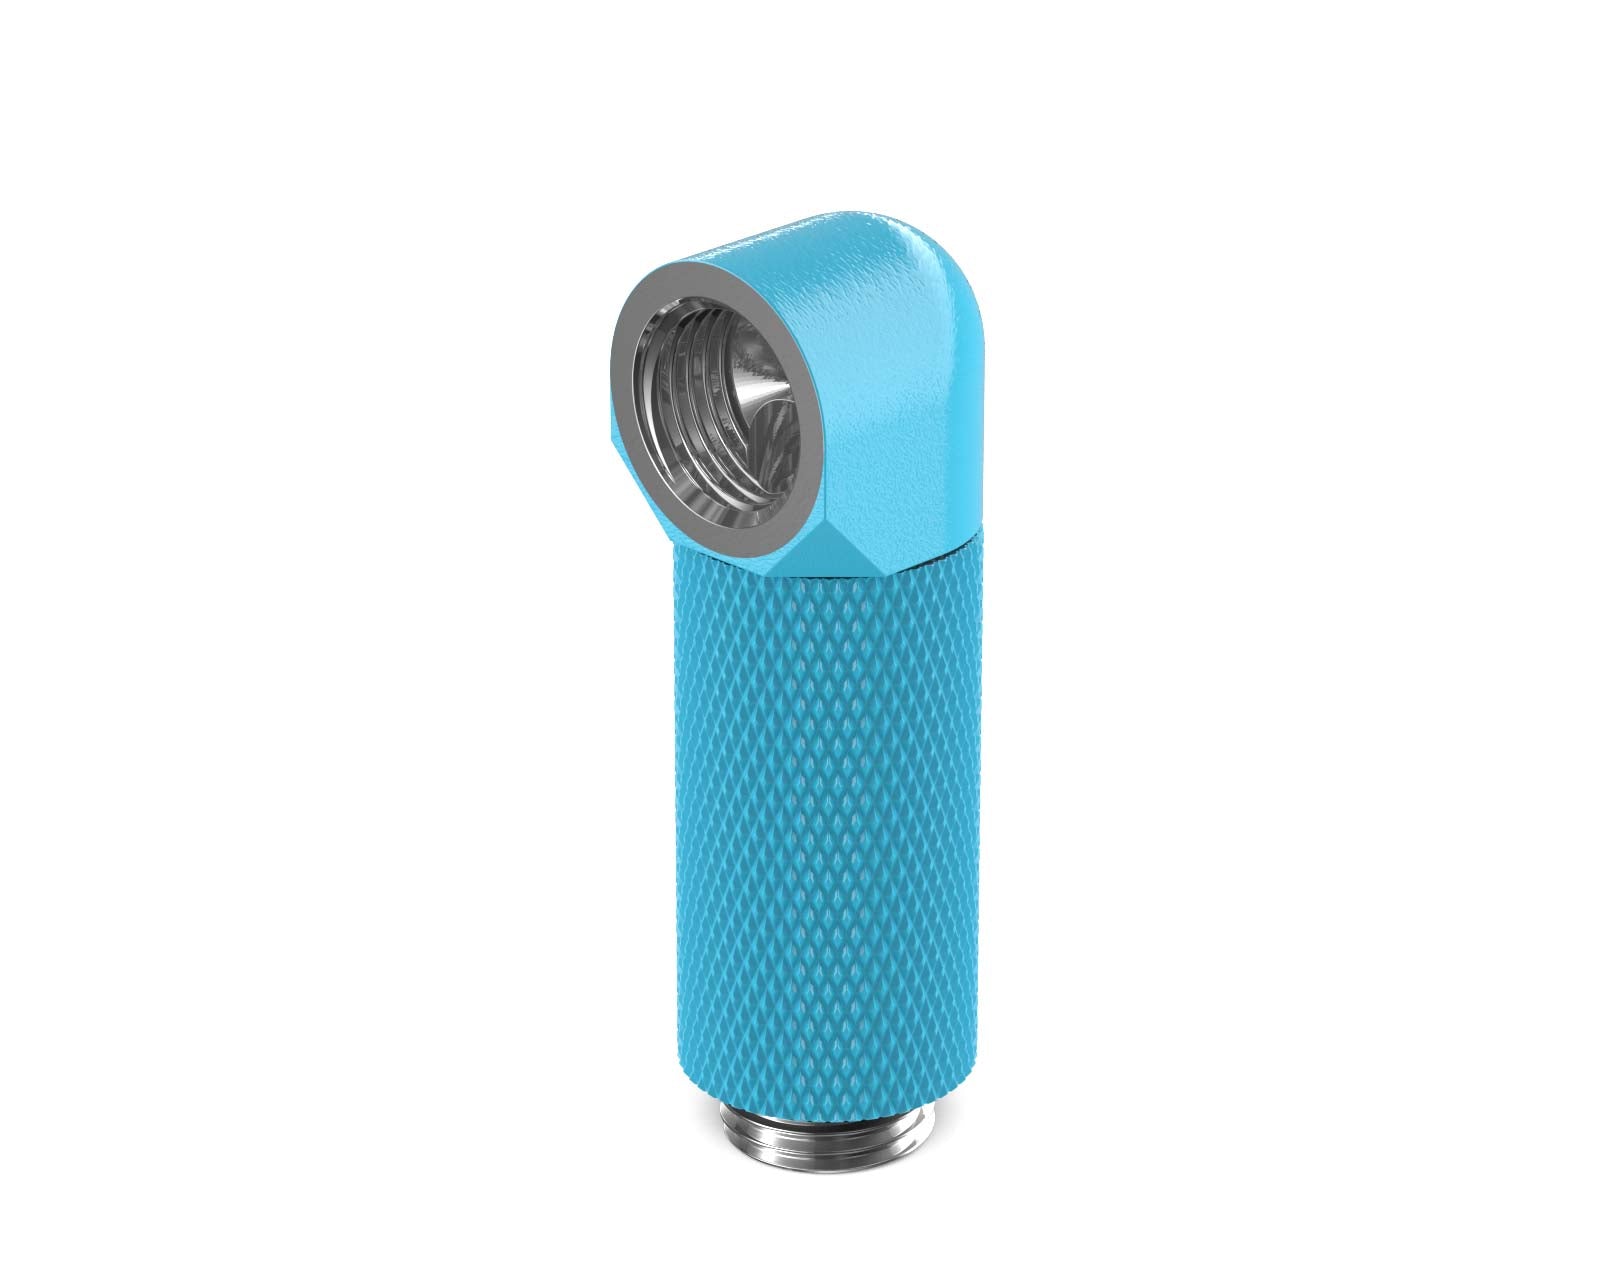 PrimoChill Male to Female G 1/4in. 90 Degree SX Rotary 35mm Extension Elbow Fitting - PrimoChill - KEEPING IT COOL Sky Blue